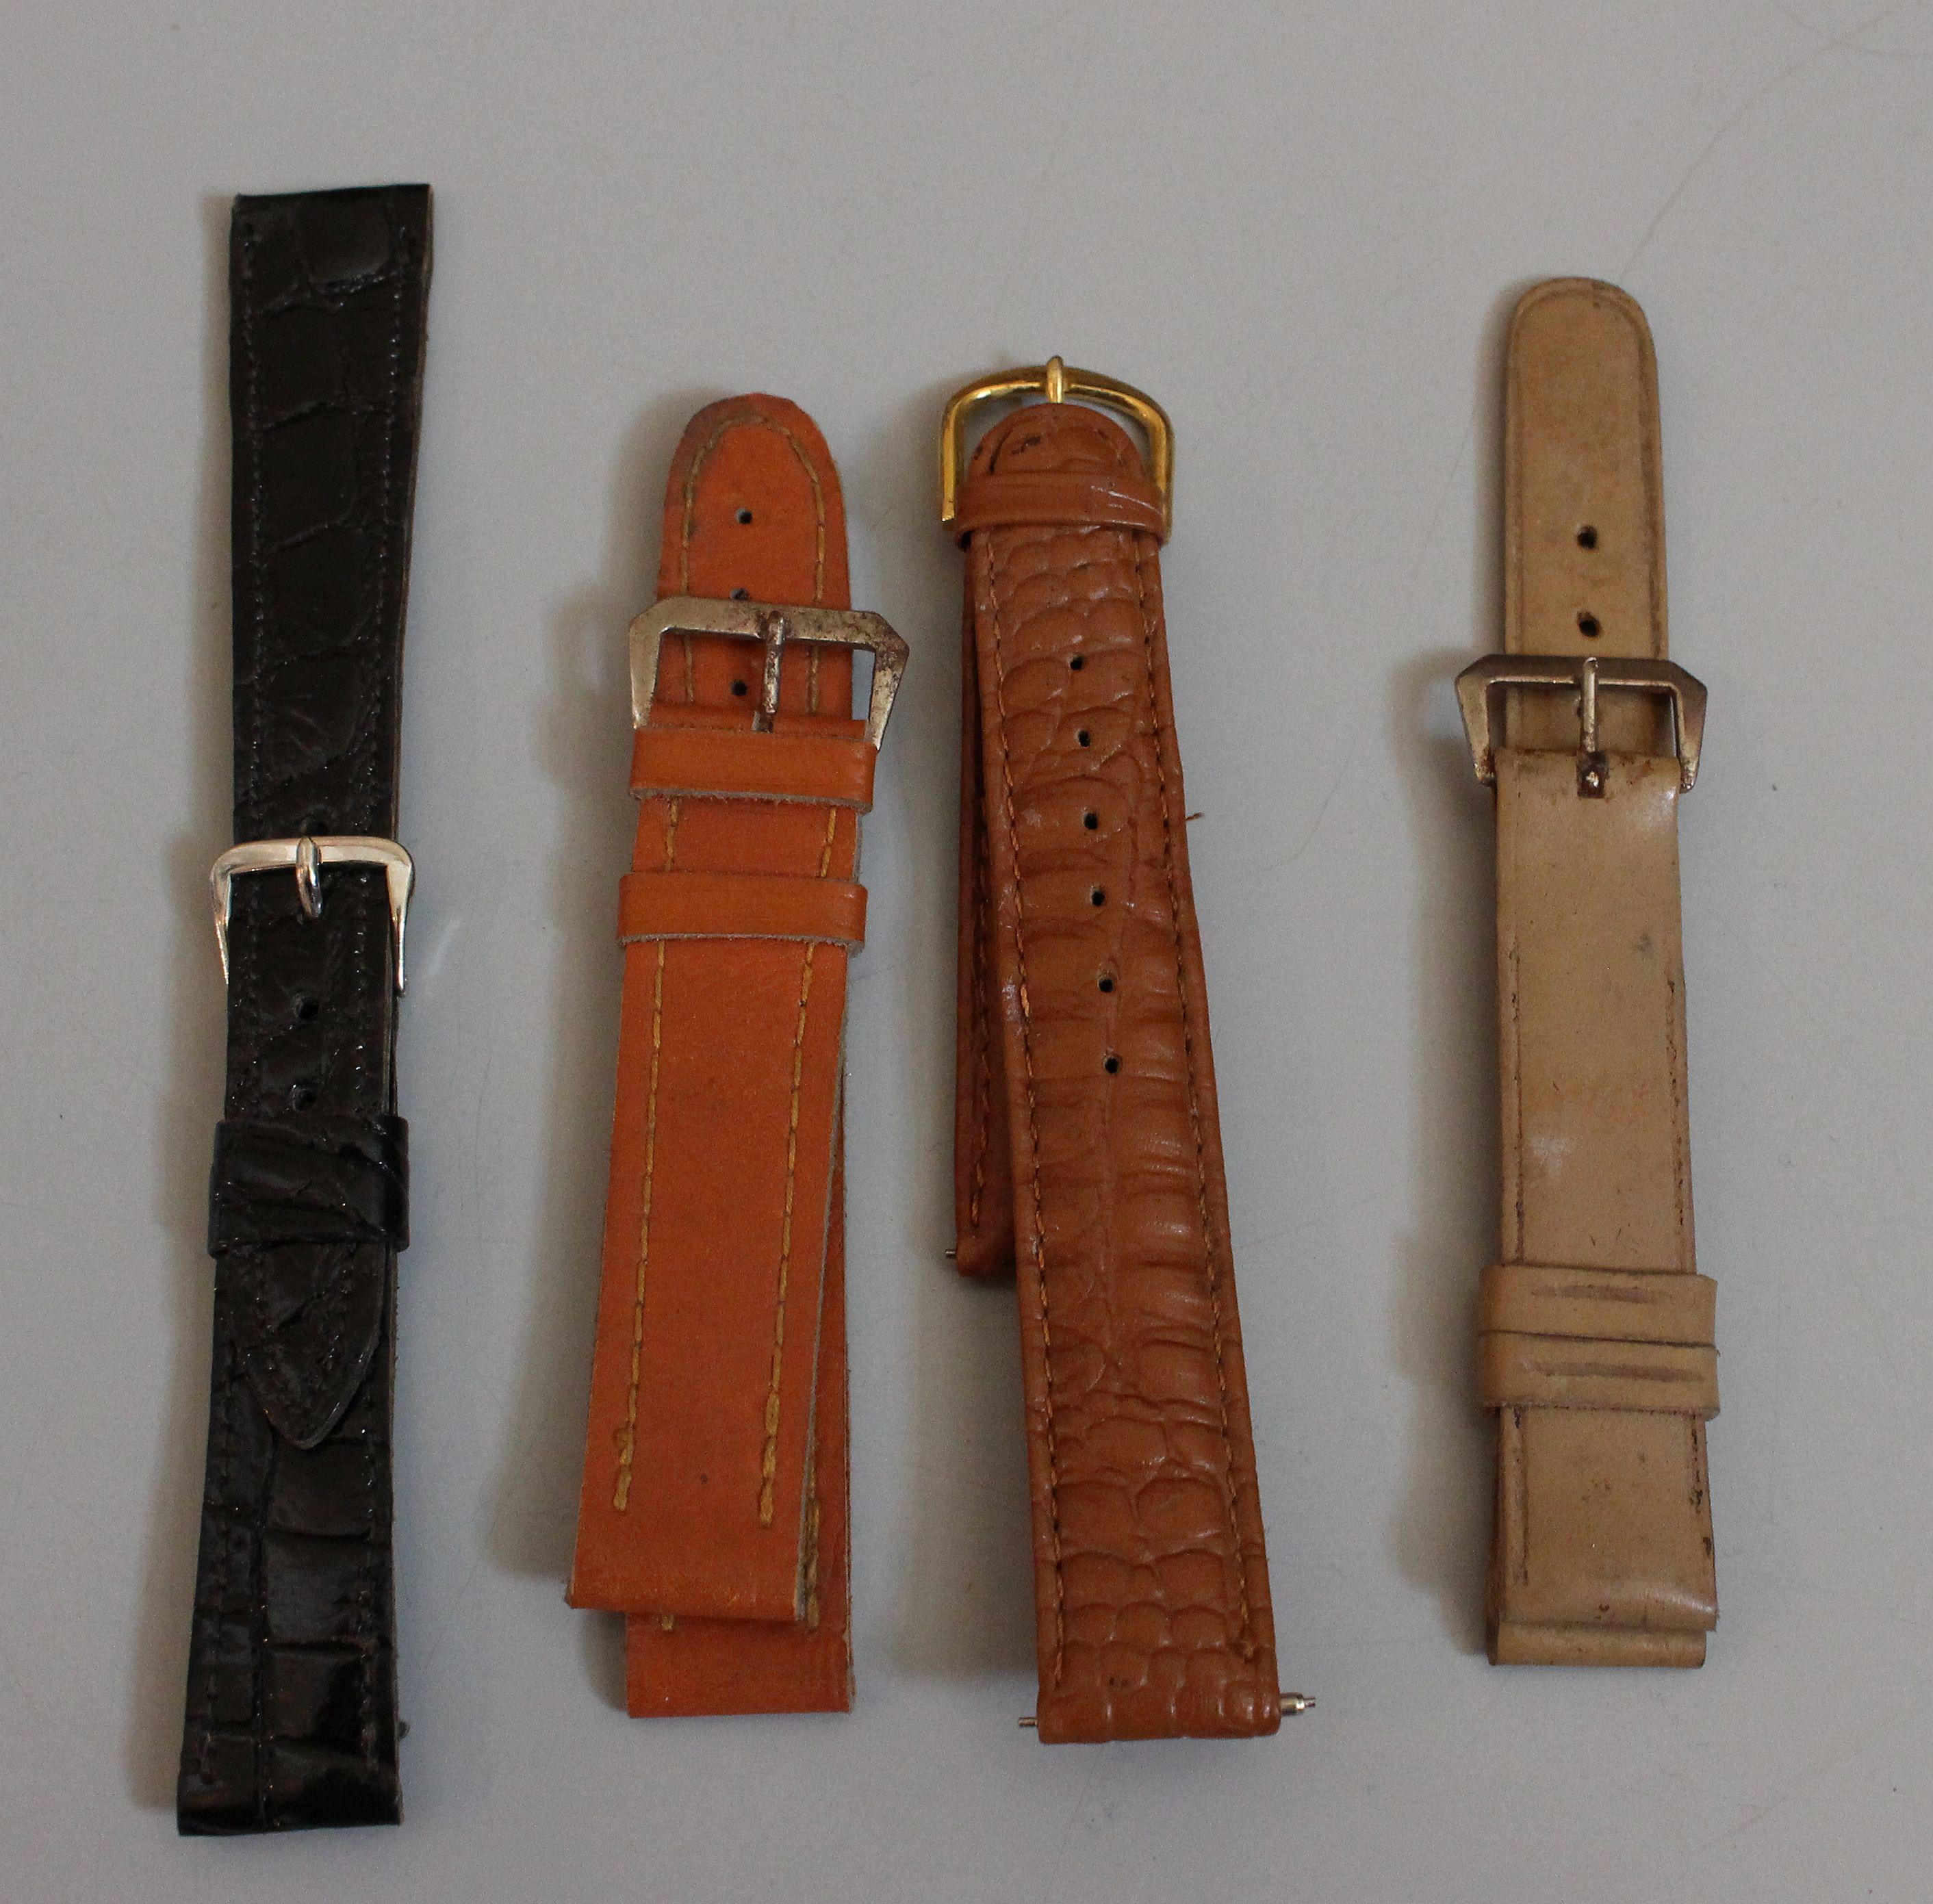 European Vintage Wristwatches Anker, Omega, Orion,  Lanco Swiss, Chronometre In Fair Condition For Sale In Los Angeles, CA